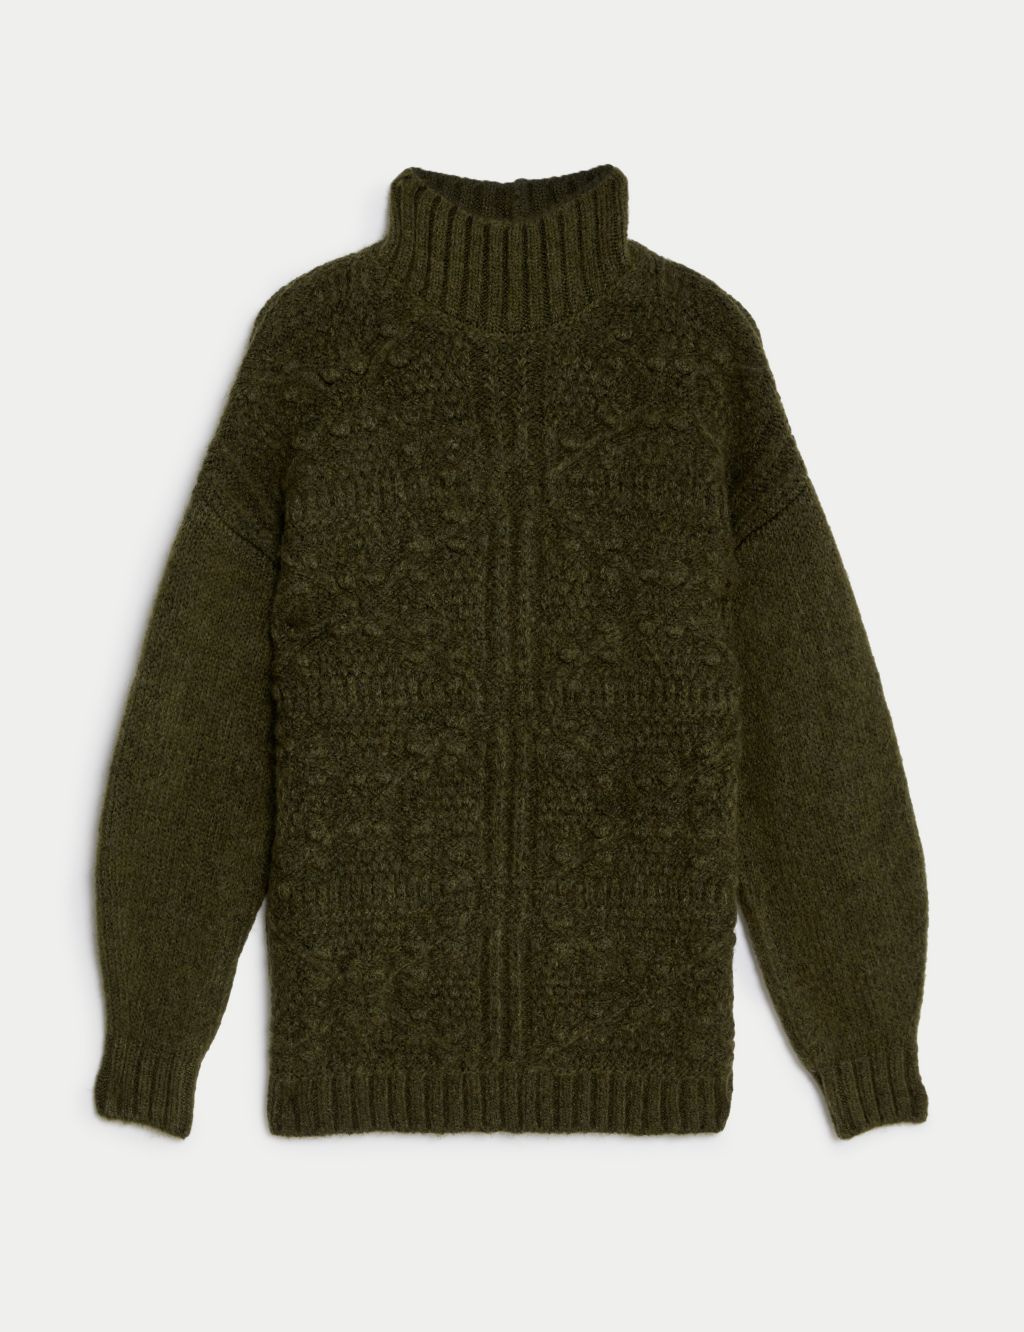 Cable Knit Longline Jumper with Wool image 2